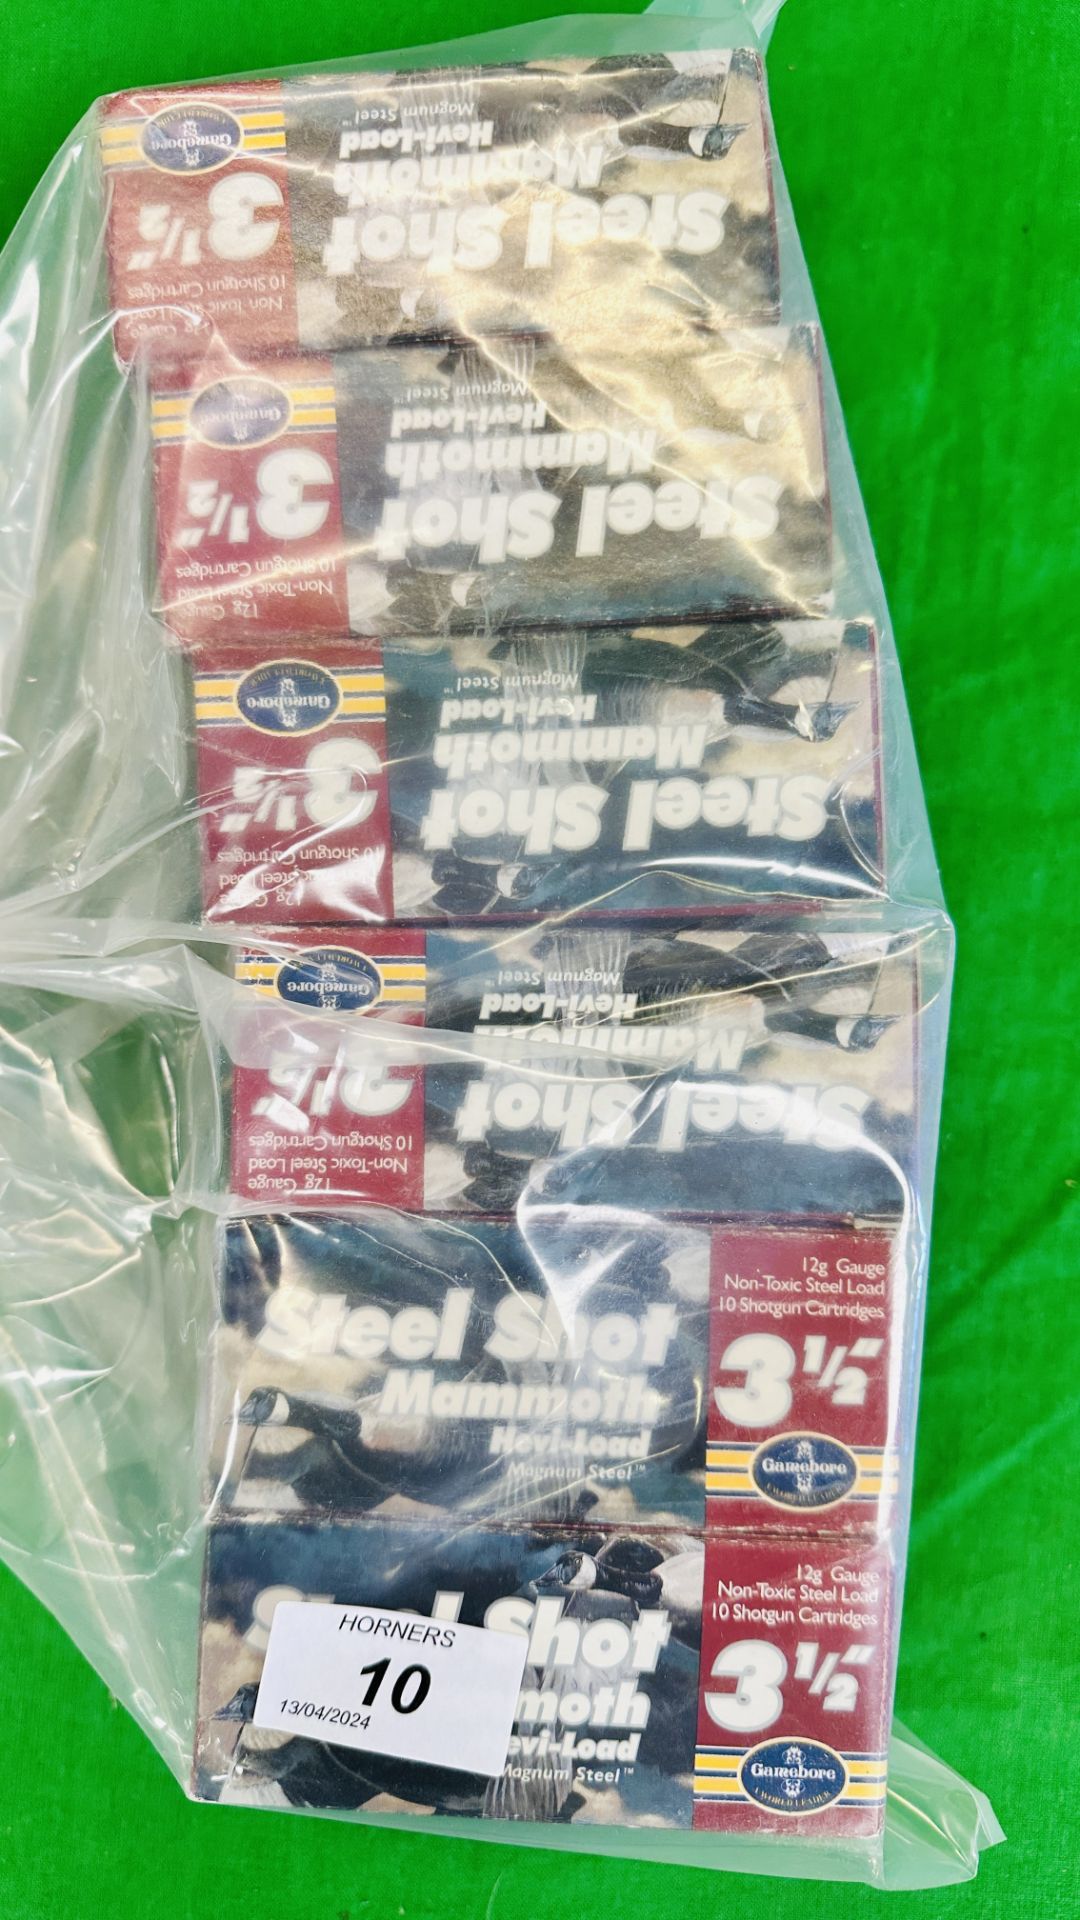 60 X GAMEBORE MAMMOTH HEVI LOAD CARTRIDGES MAGNUM STEEL 3½" 42 GRM BB LOAD - (TO BE COLLECTED IN